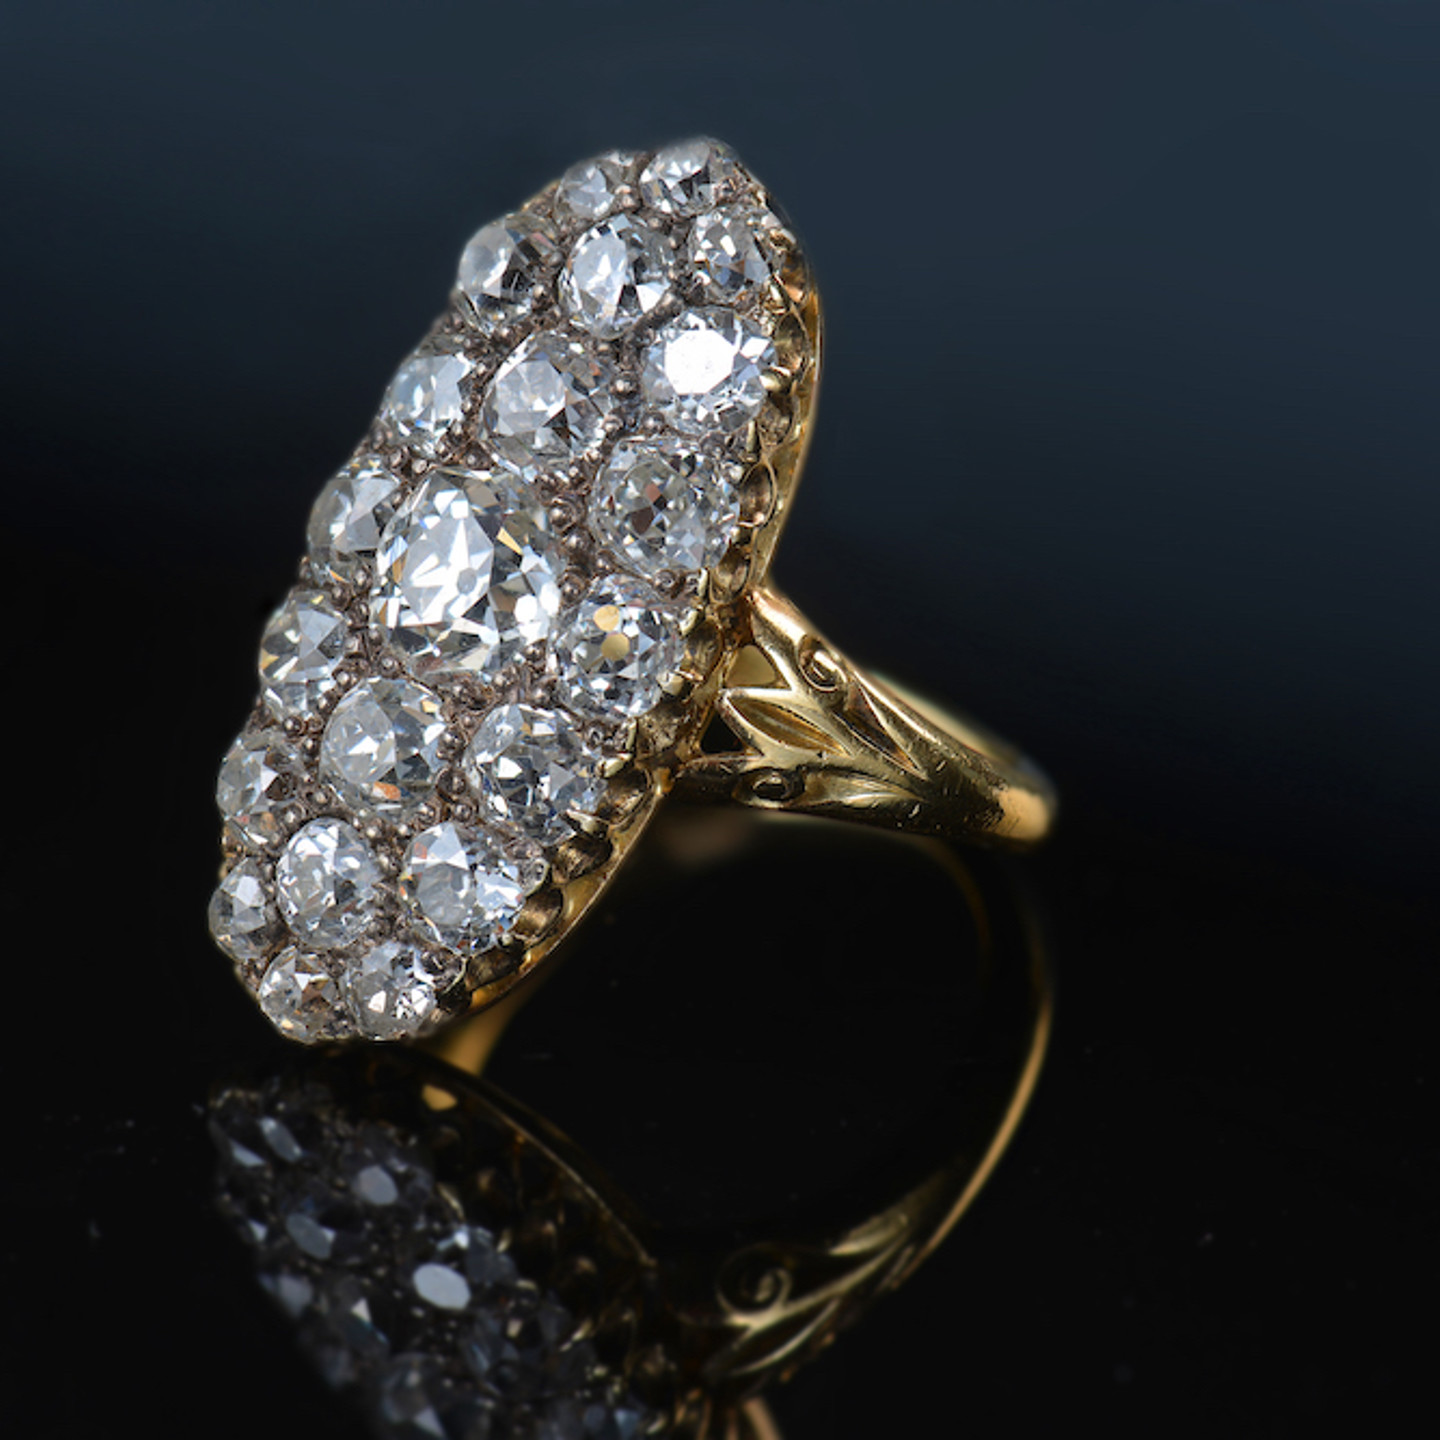 Victorian Ring Set With Old Cut Diamonds. Sold For £4,700